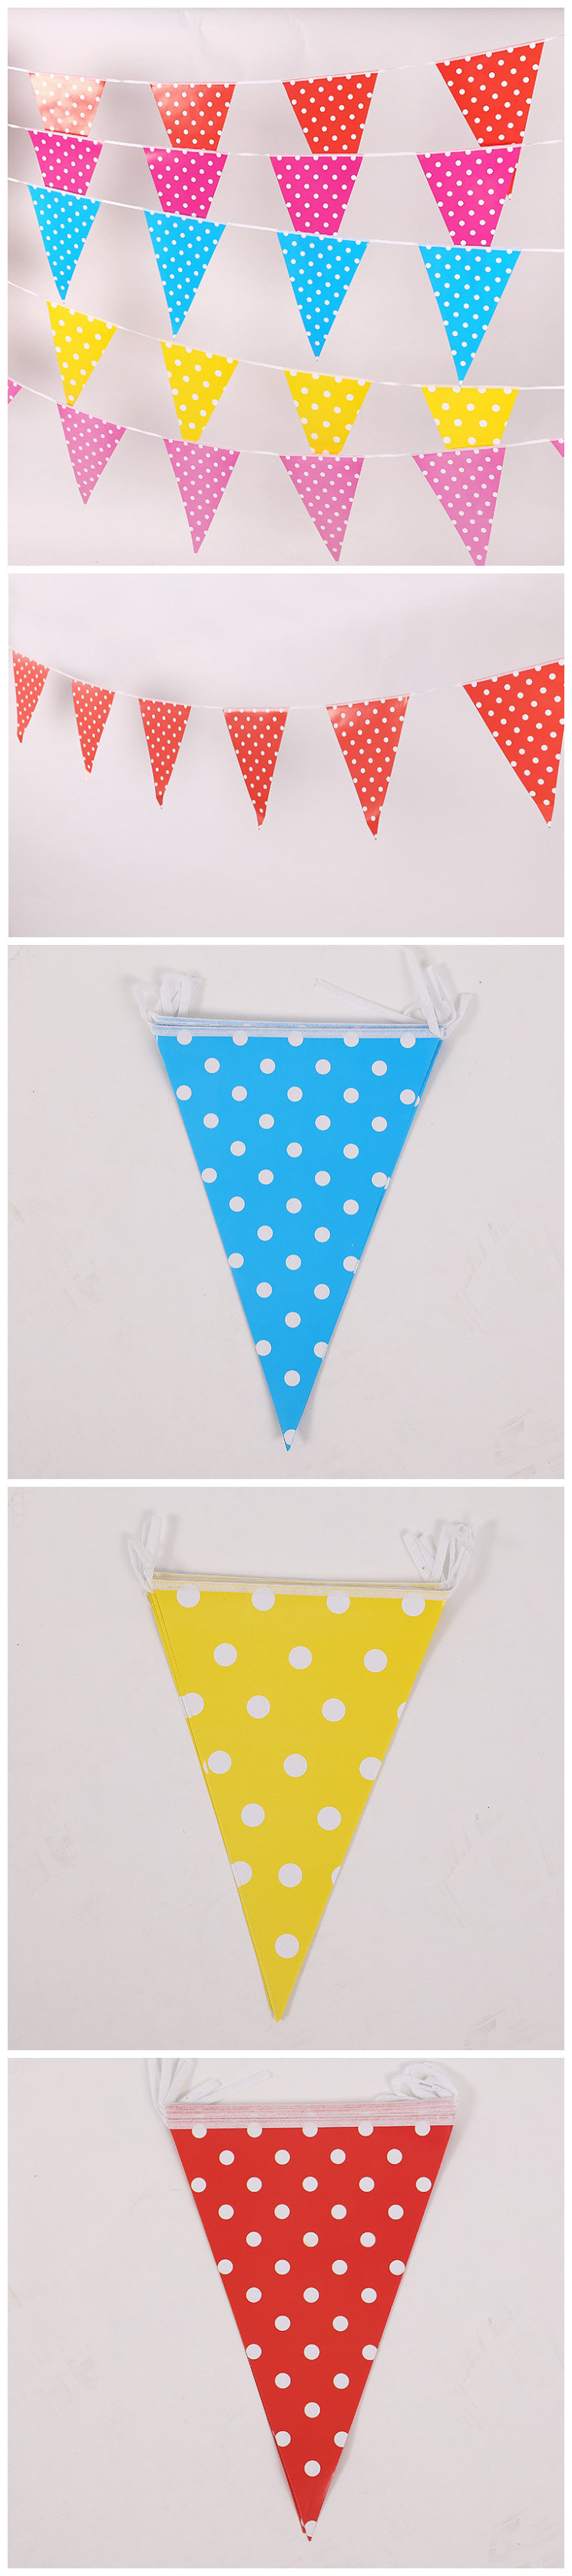 Festibal Paper Triangle Paper Bunting Flags and Banners